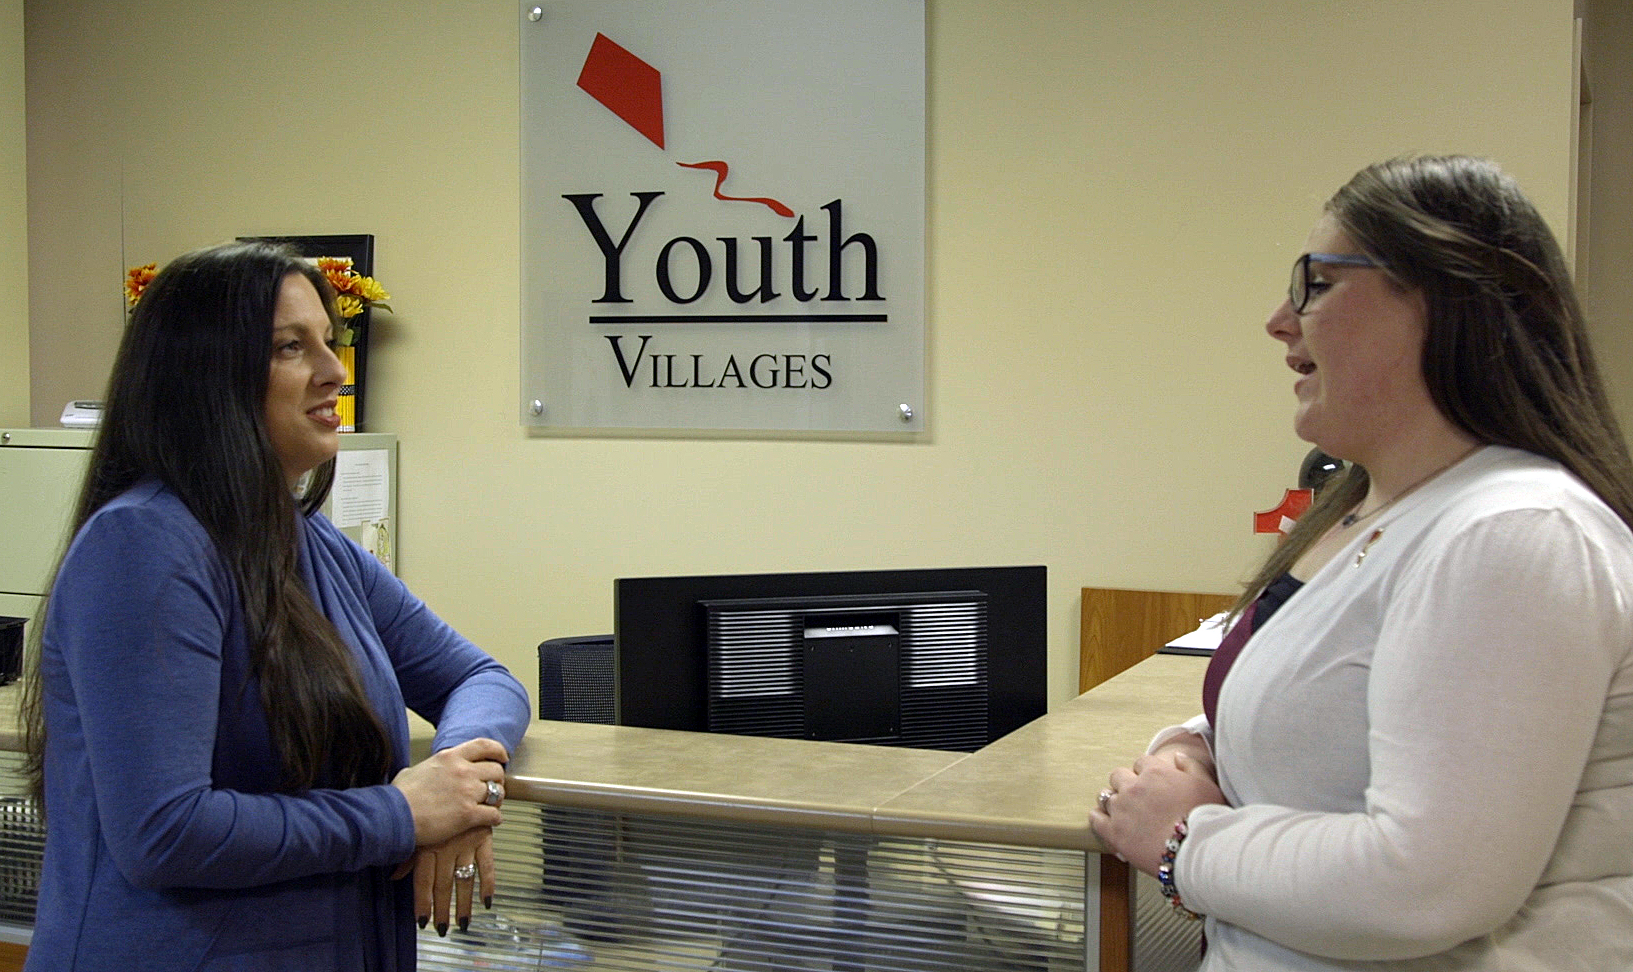 two women standing and talking, with sign in background that says Youth Village